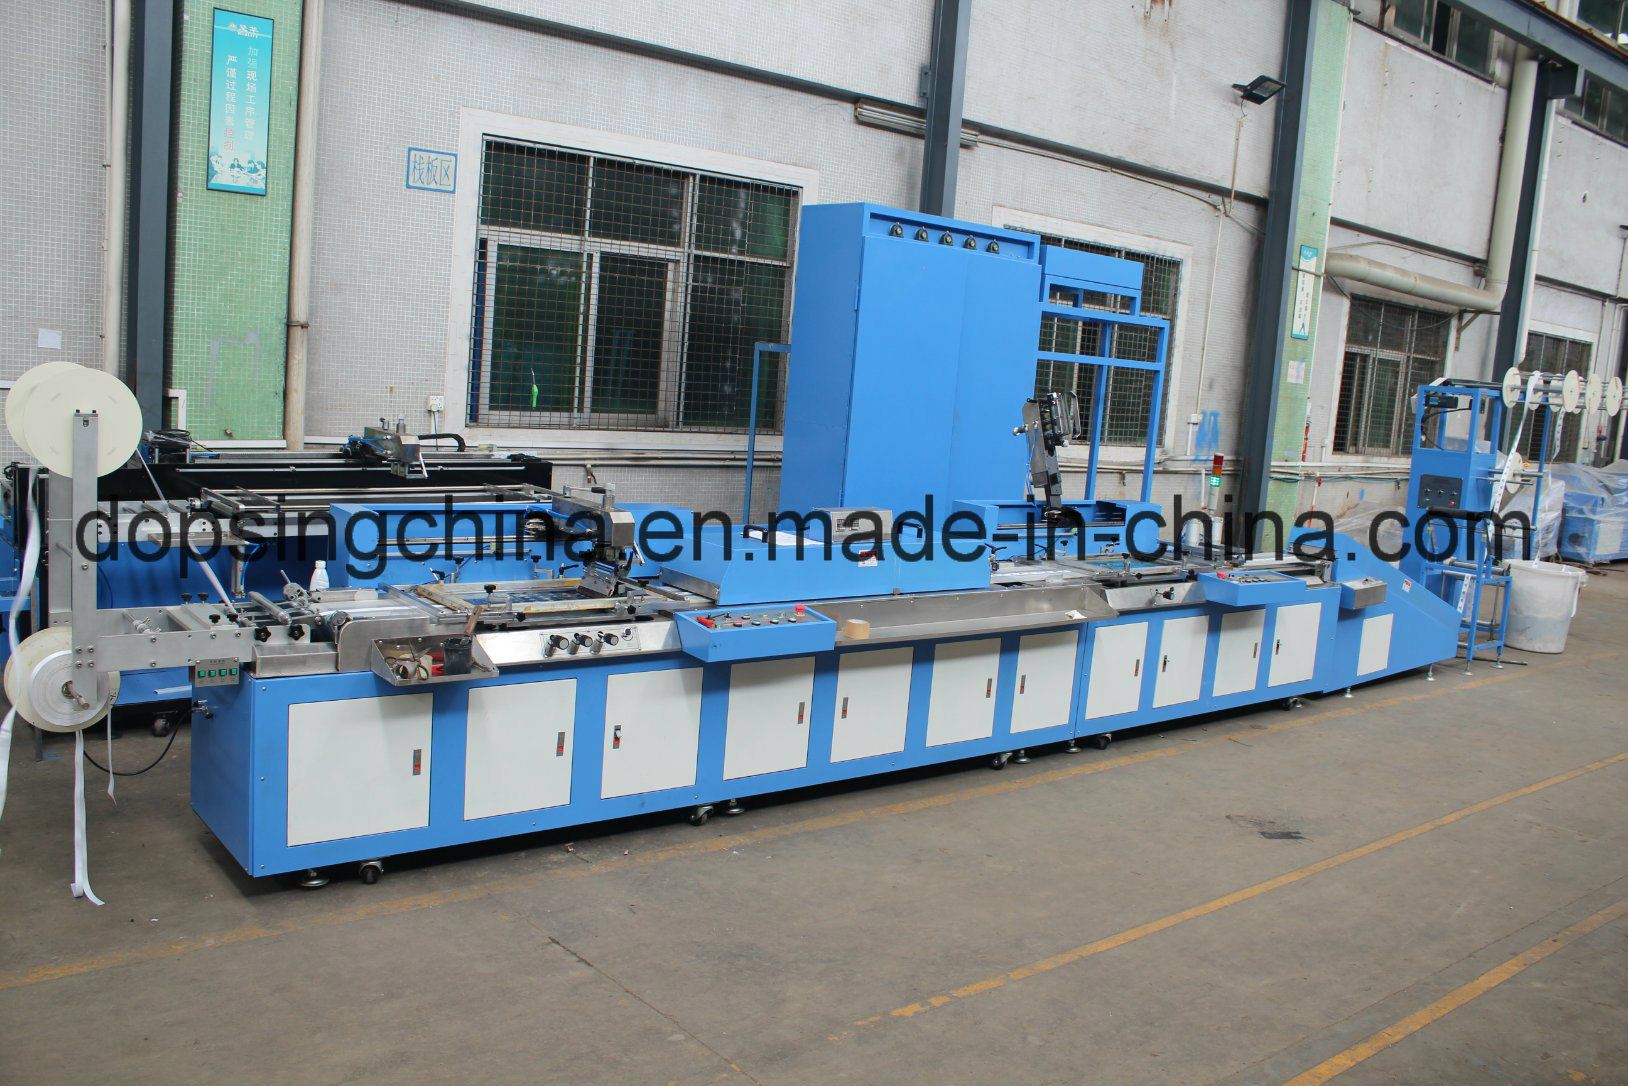 High Quality Ribbons Wrapping Machine -
 Apparel Label/Satin Label Automatic Screen Printing Machine for Sale – Kin Wah